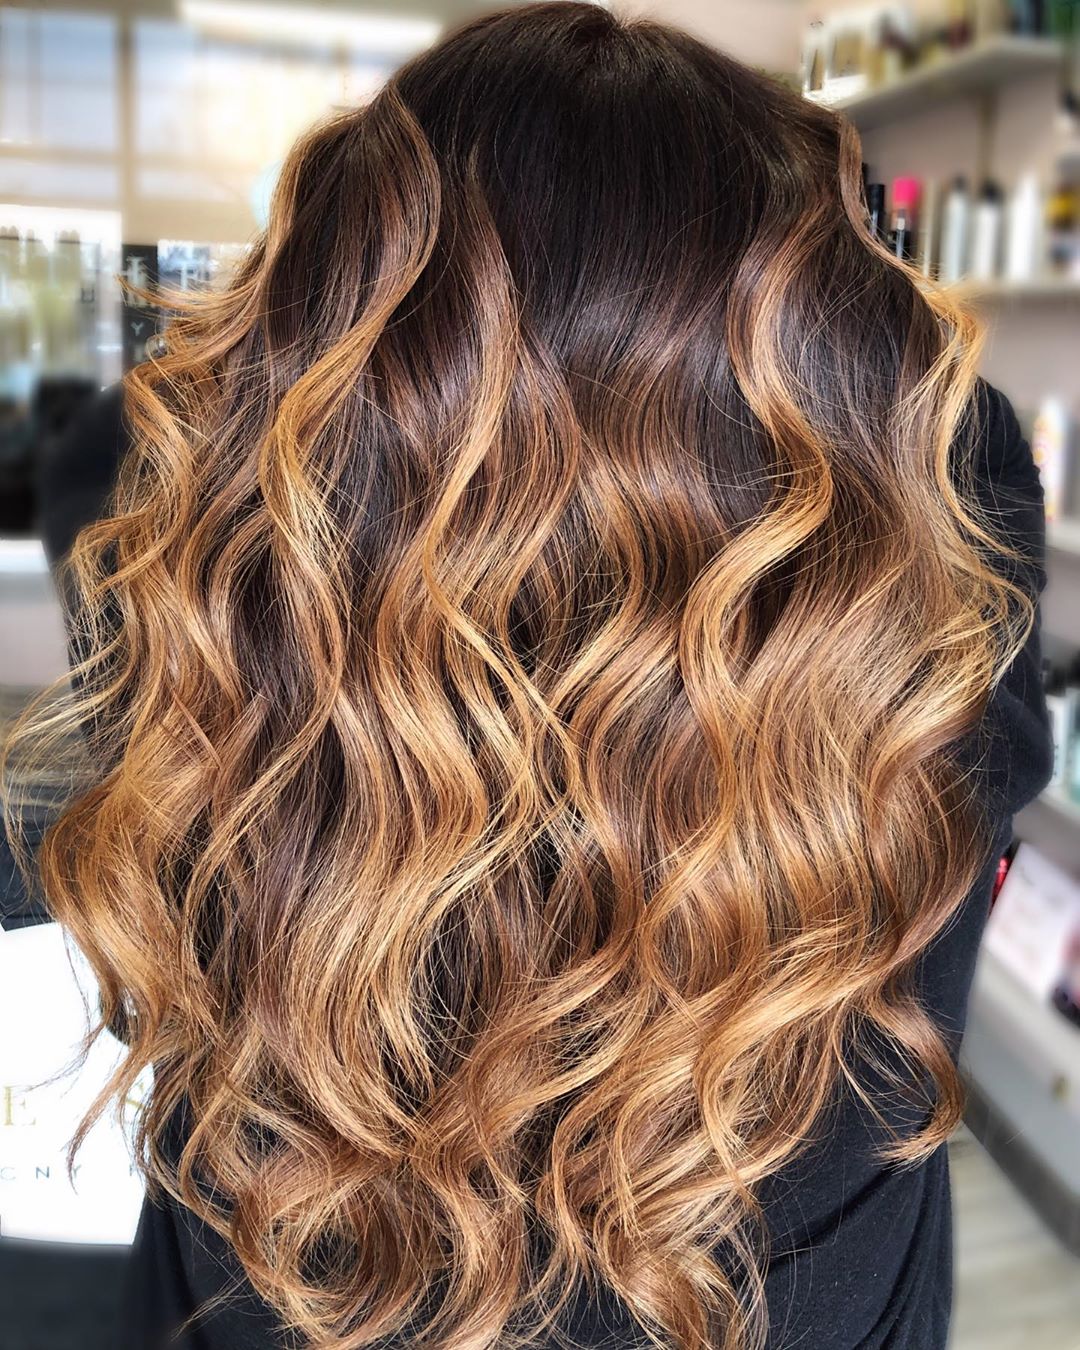 Brown to caramel blonde ombre